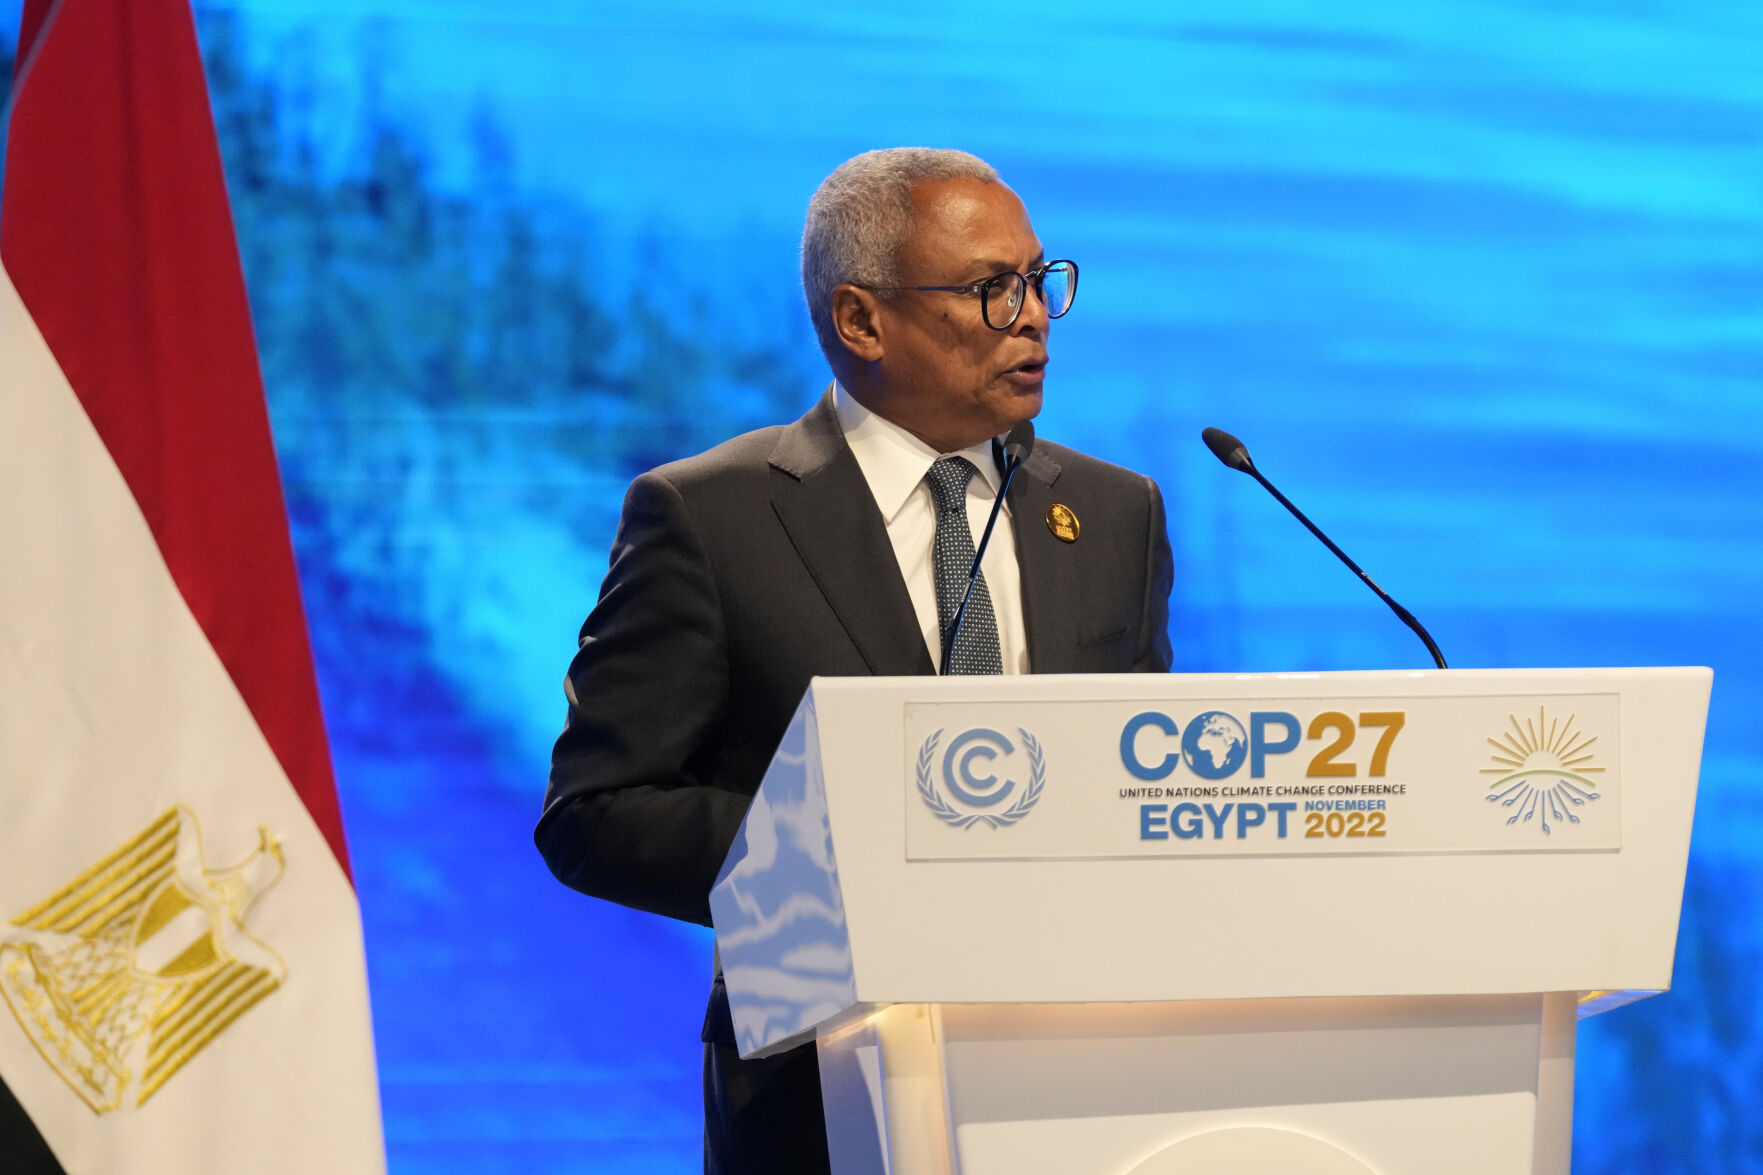 <p>Jose Maria Neves, president of Cabo Verde speaks at the COP27 U.N. Climate Summit, Tuesday, Nov. 8, 2022, in Sharm el-Sheikh, Egypt. (AP Photo/Peter Dejong)</p>   PHOTO CREDIT: Peter Dejong - staff, AP